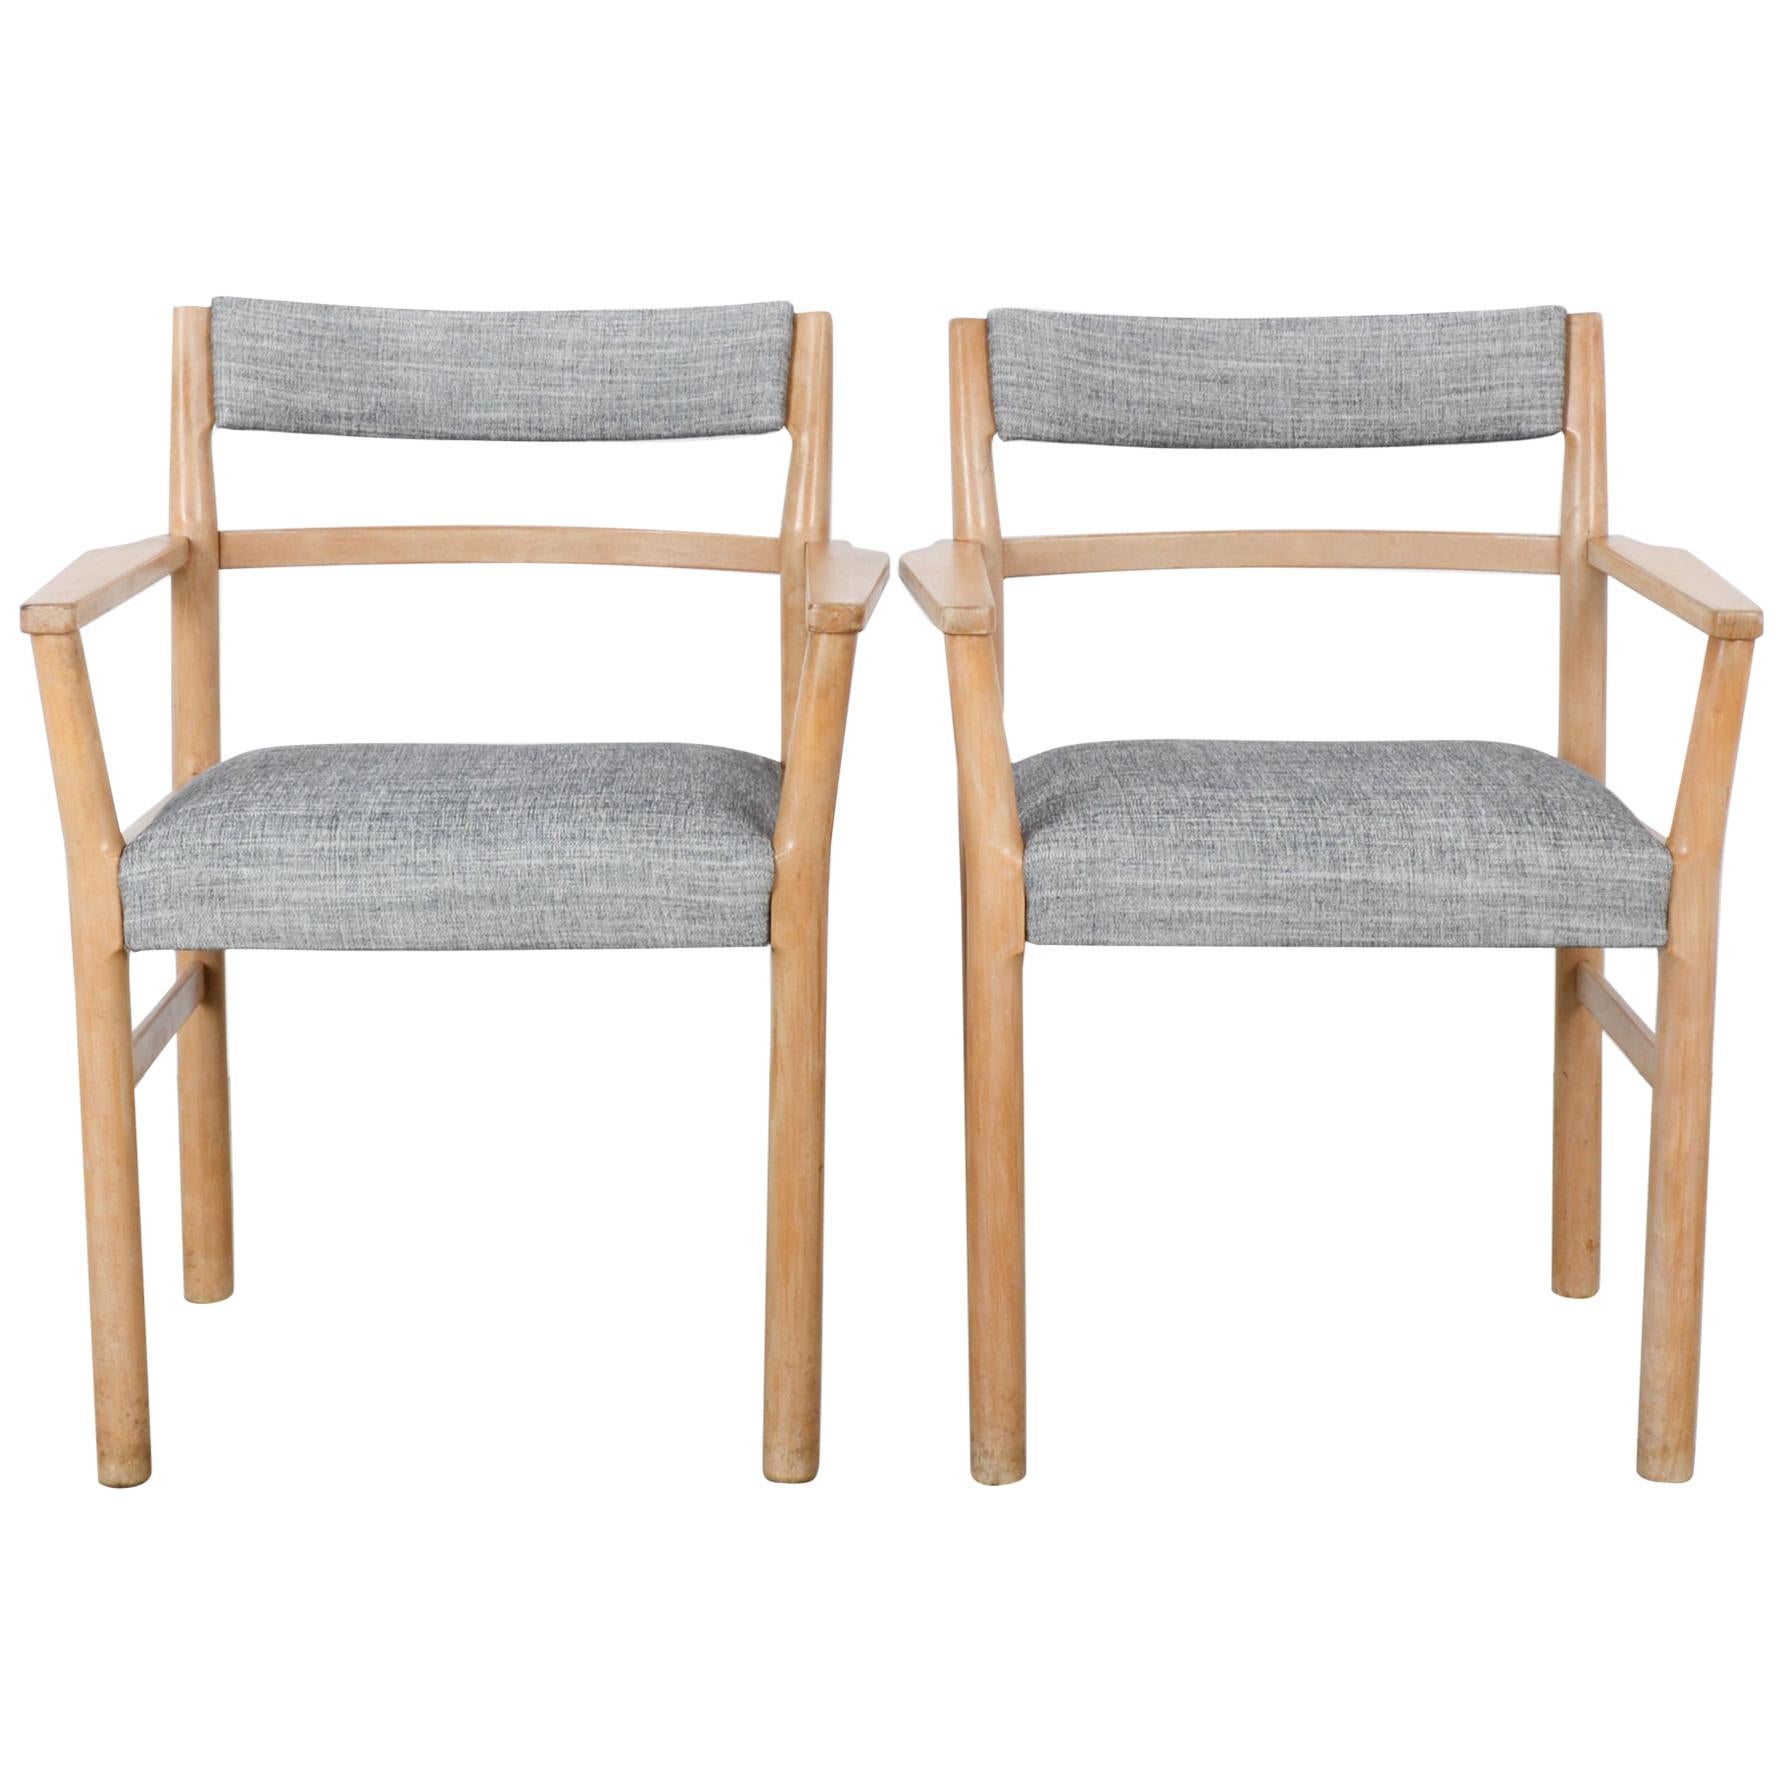 1960s Danish Wooden Armchairs, a Pair